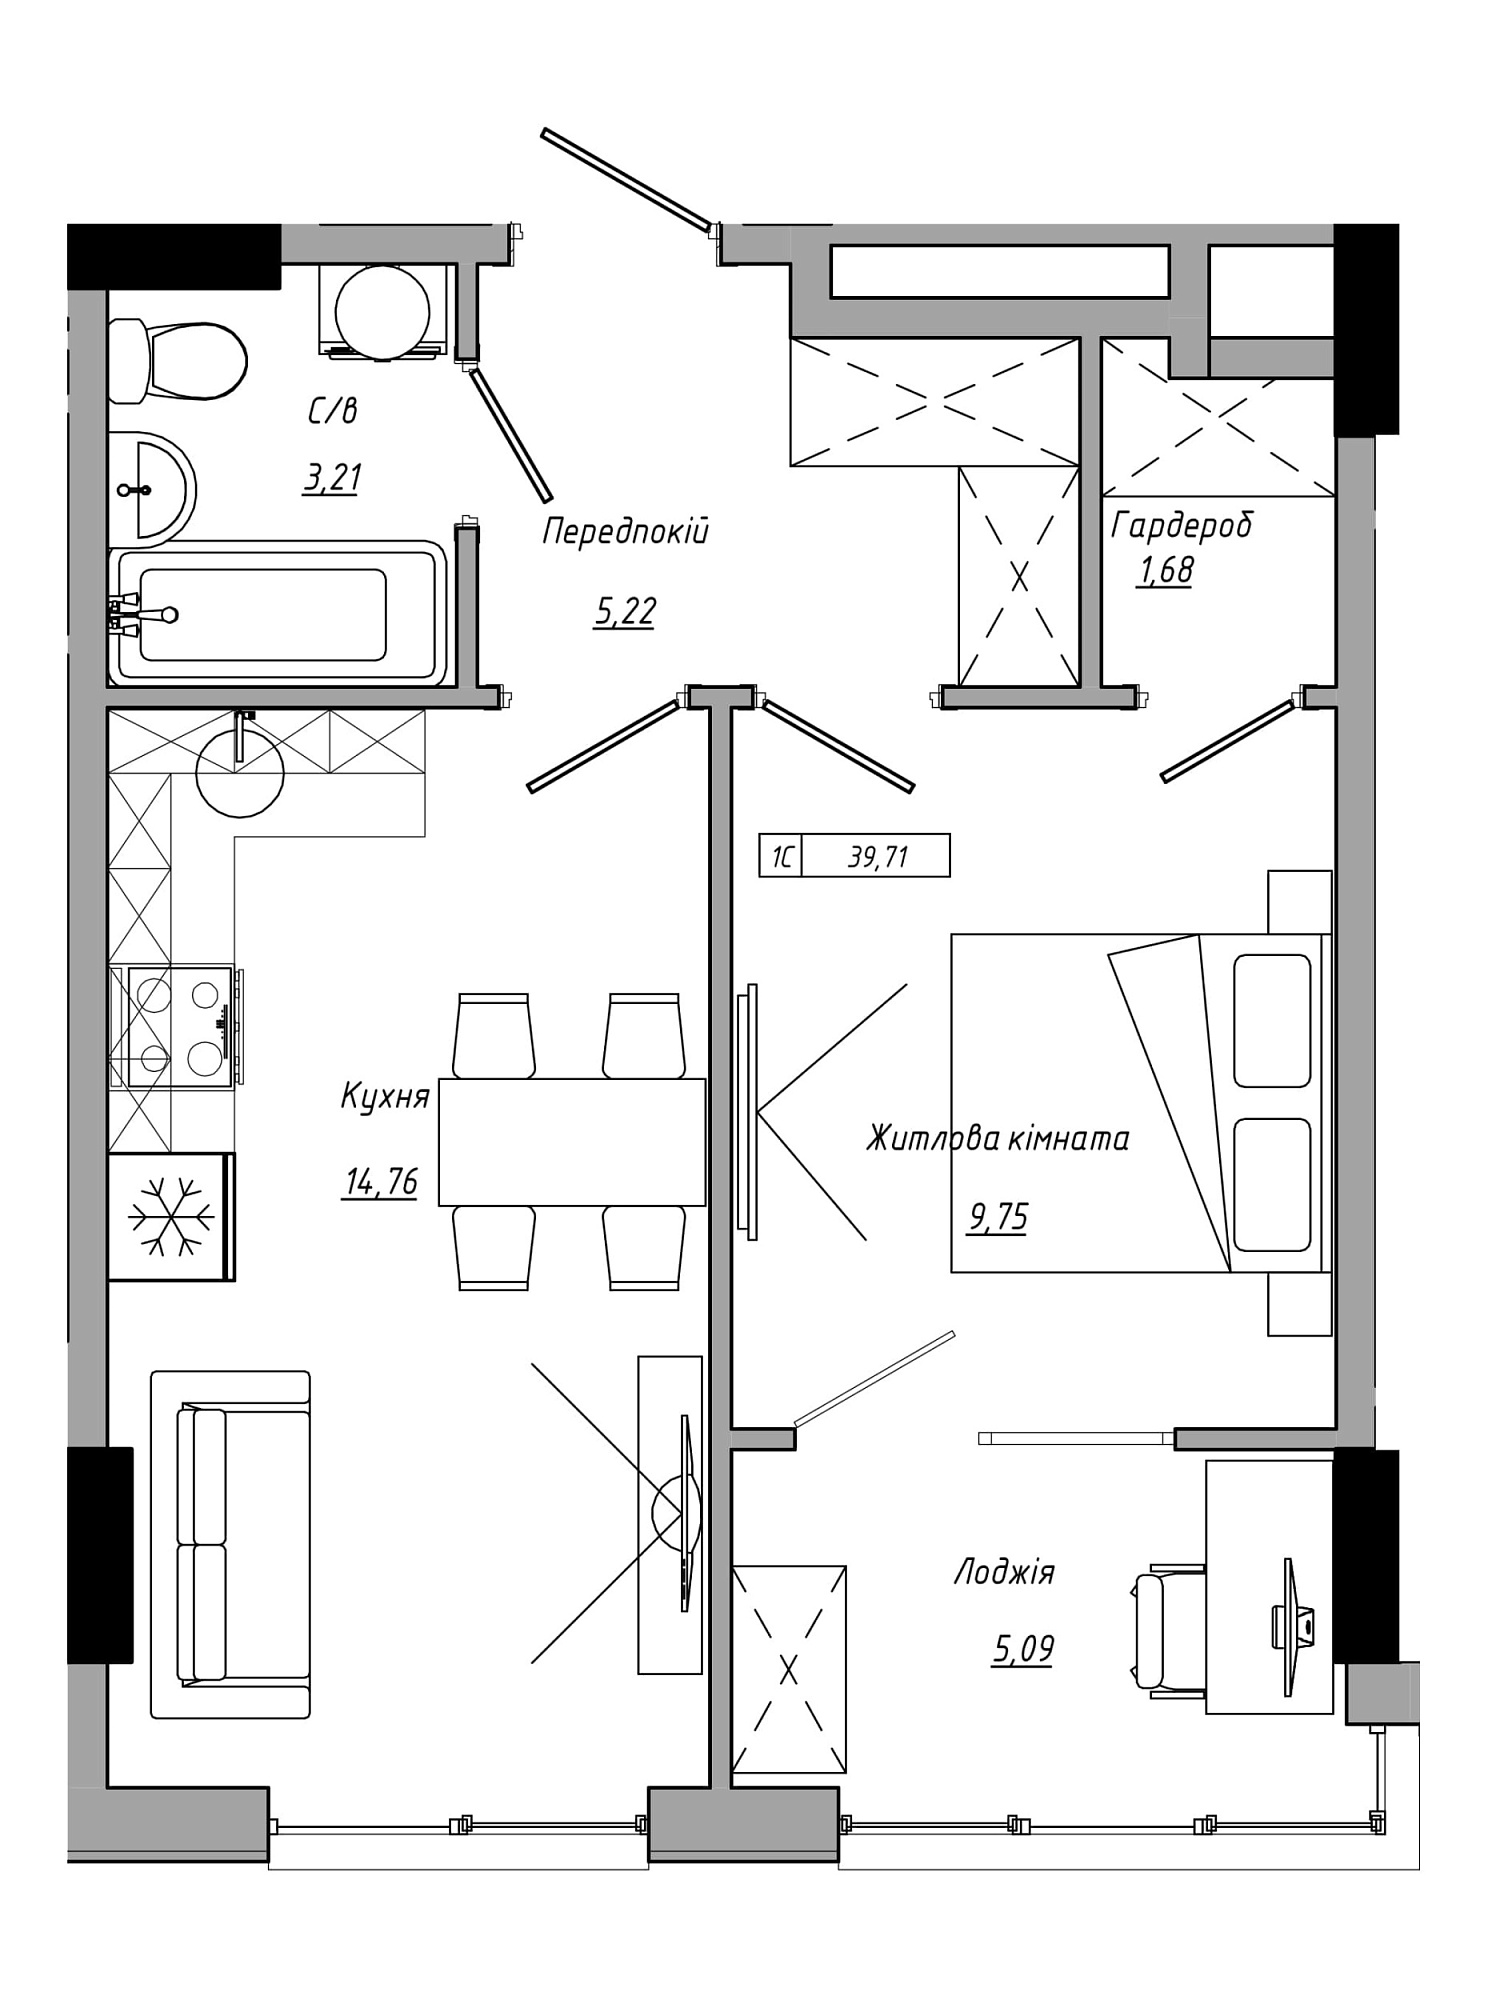 Planning 1-rm flats area 39.71m2, AB-21-06/00021.